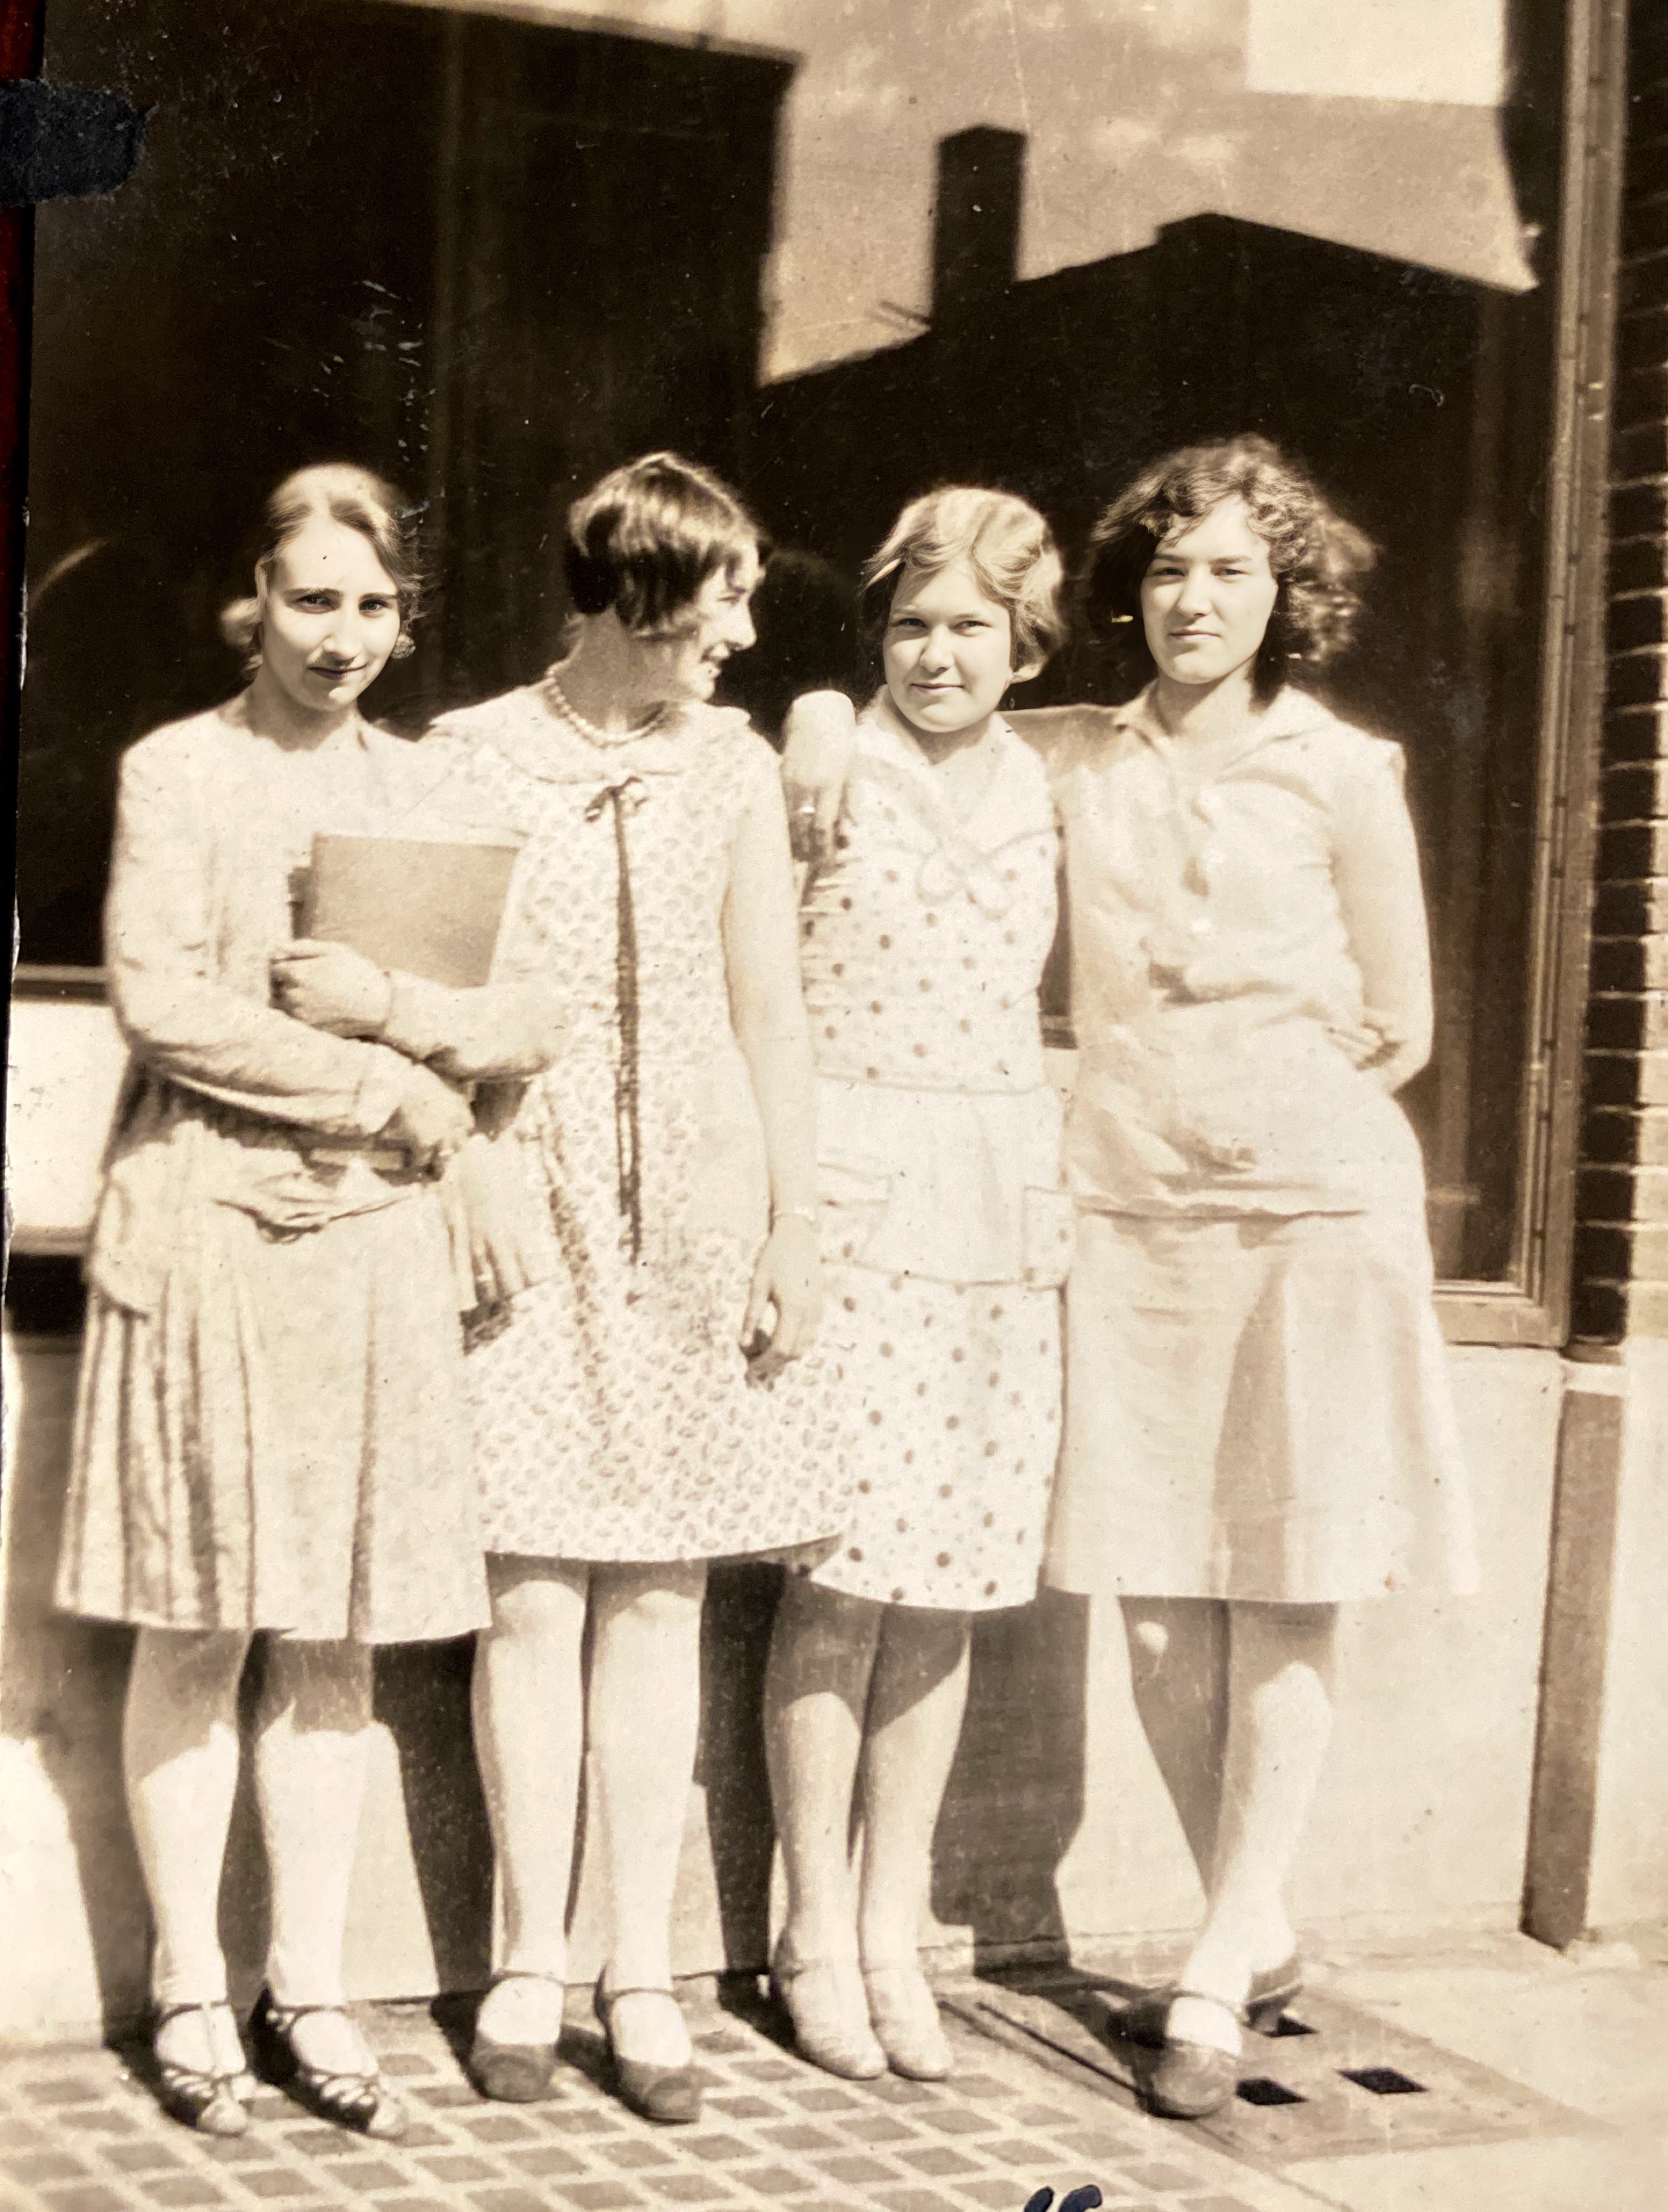 Dorothy Thoen 2nd from the right and her fellow students at Hamilton Business College. 1929.